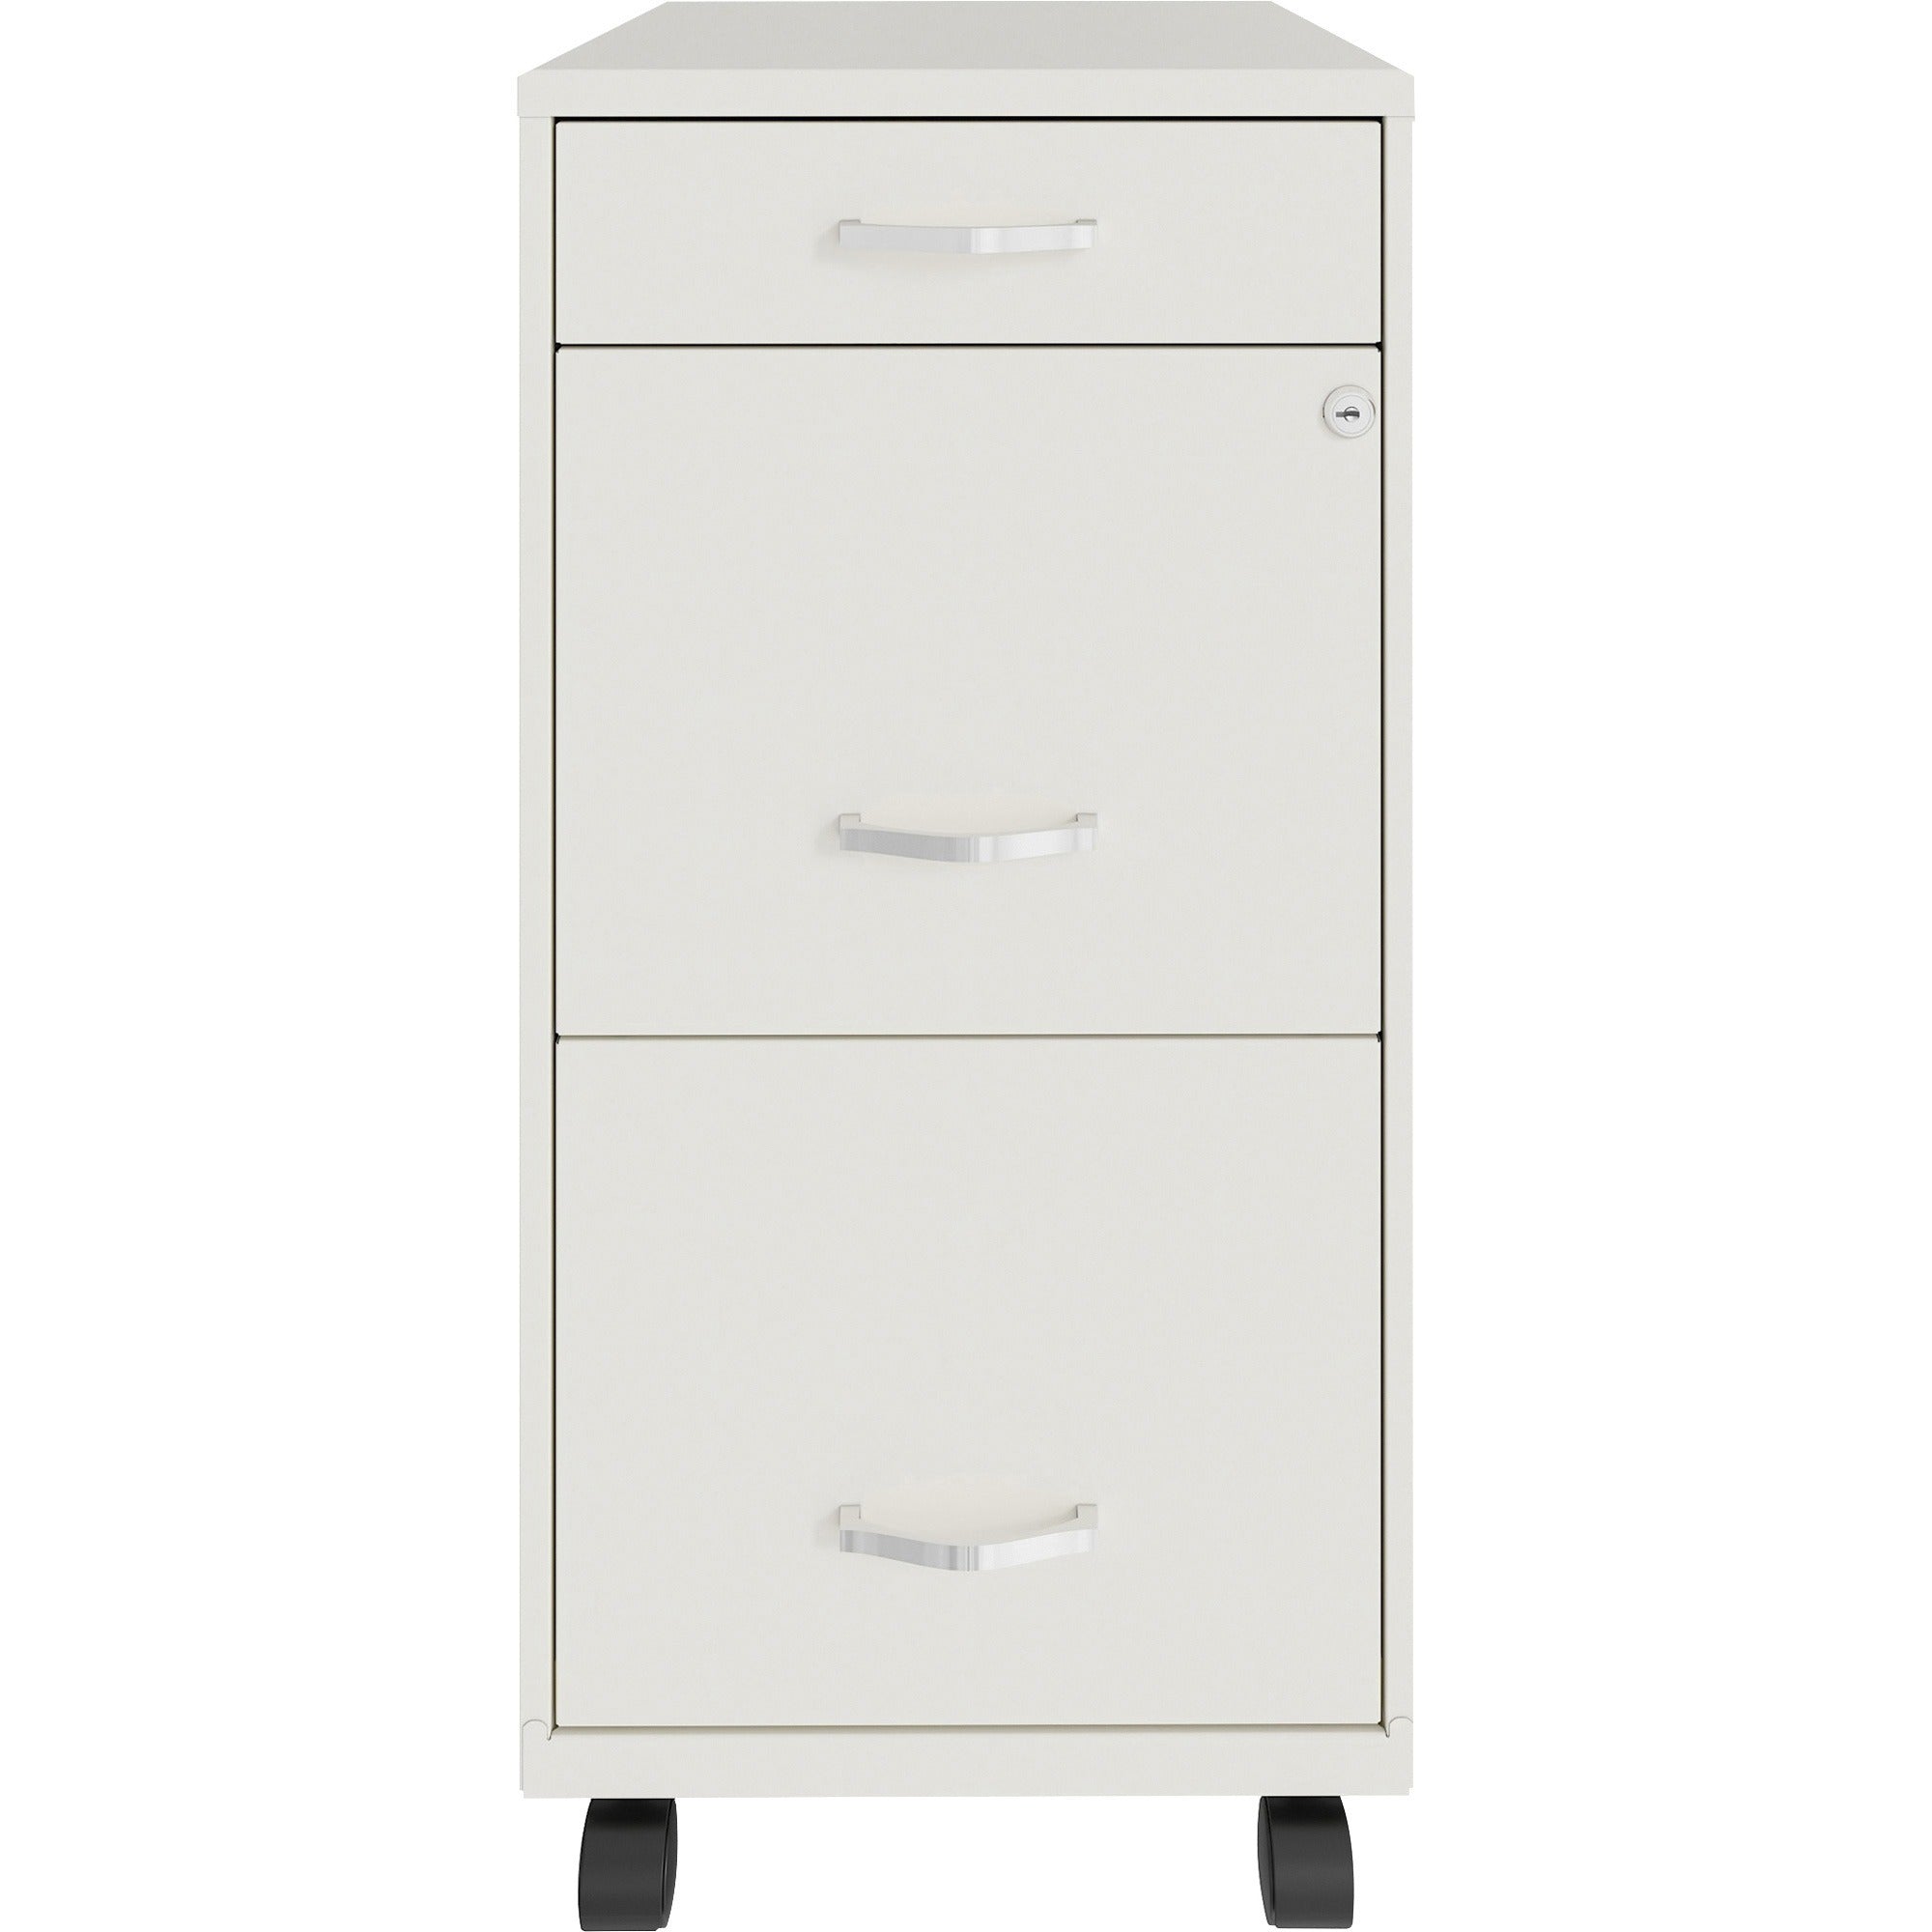 nusparc-mobile-file-cabinet-142-x-18-x-295-3-x-drawers-for-file-box-letter-mobility-locking-drawer-glide-suspension-3-4-drawer-extension-cam-lock-nonporous-surface-white-painted-steel-recycled_nprvf318bmwe - 2